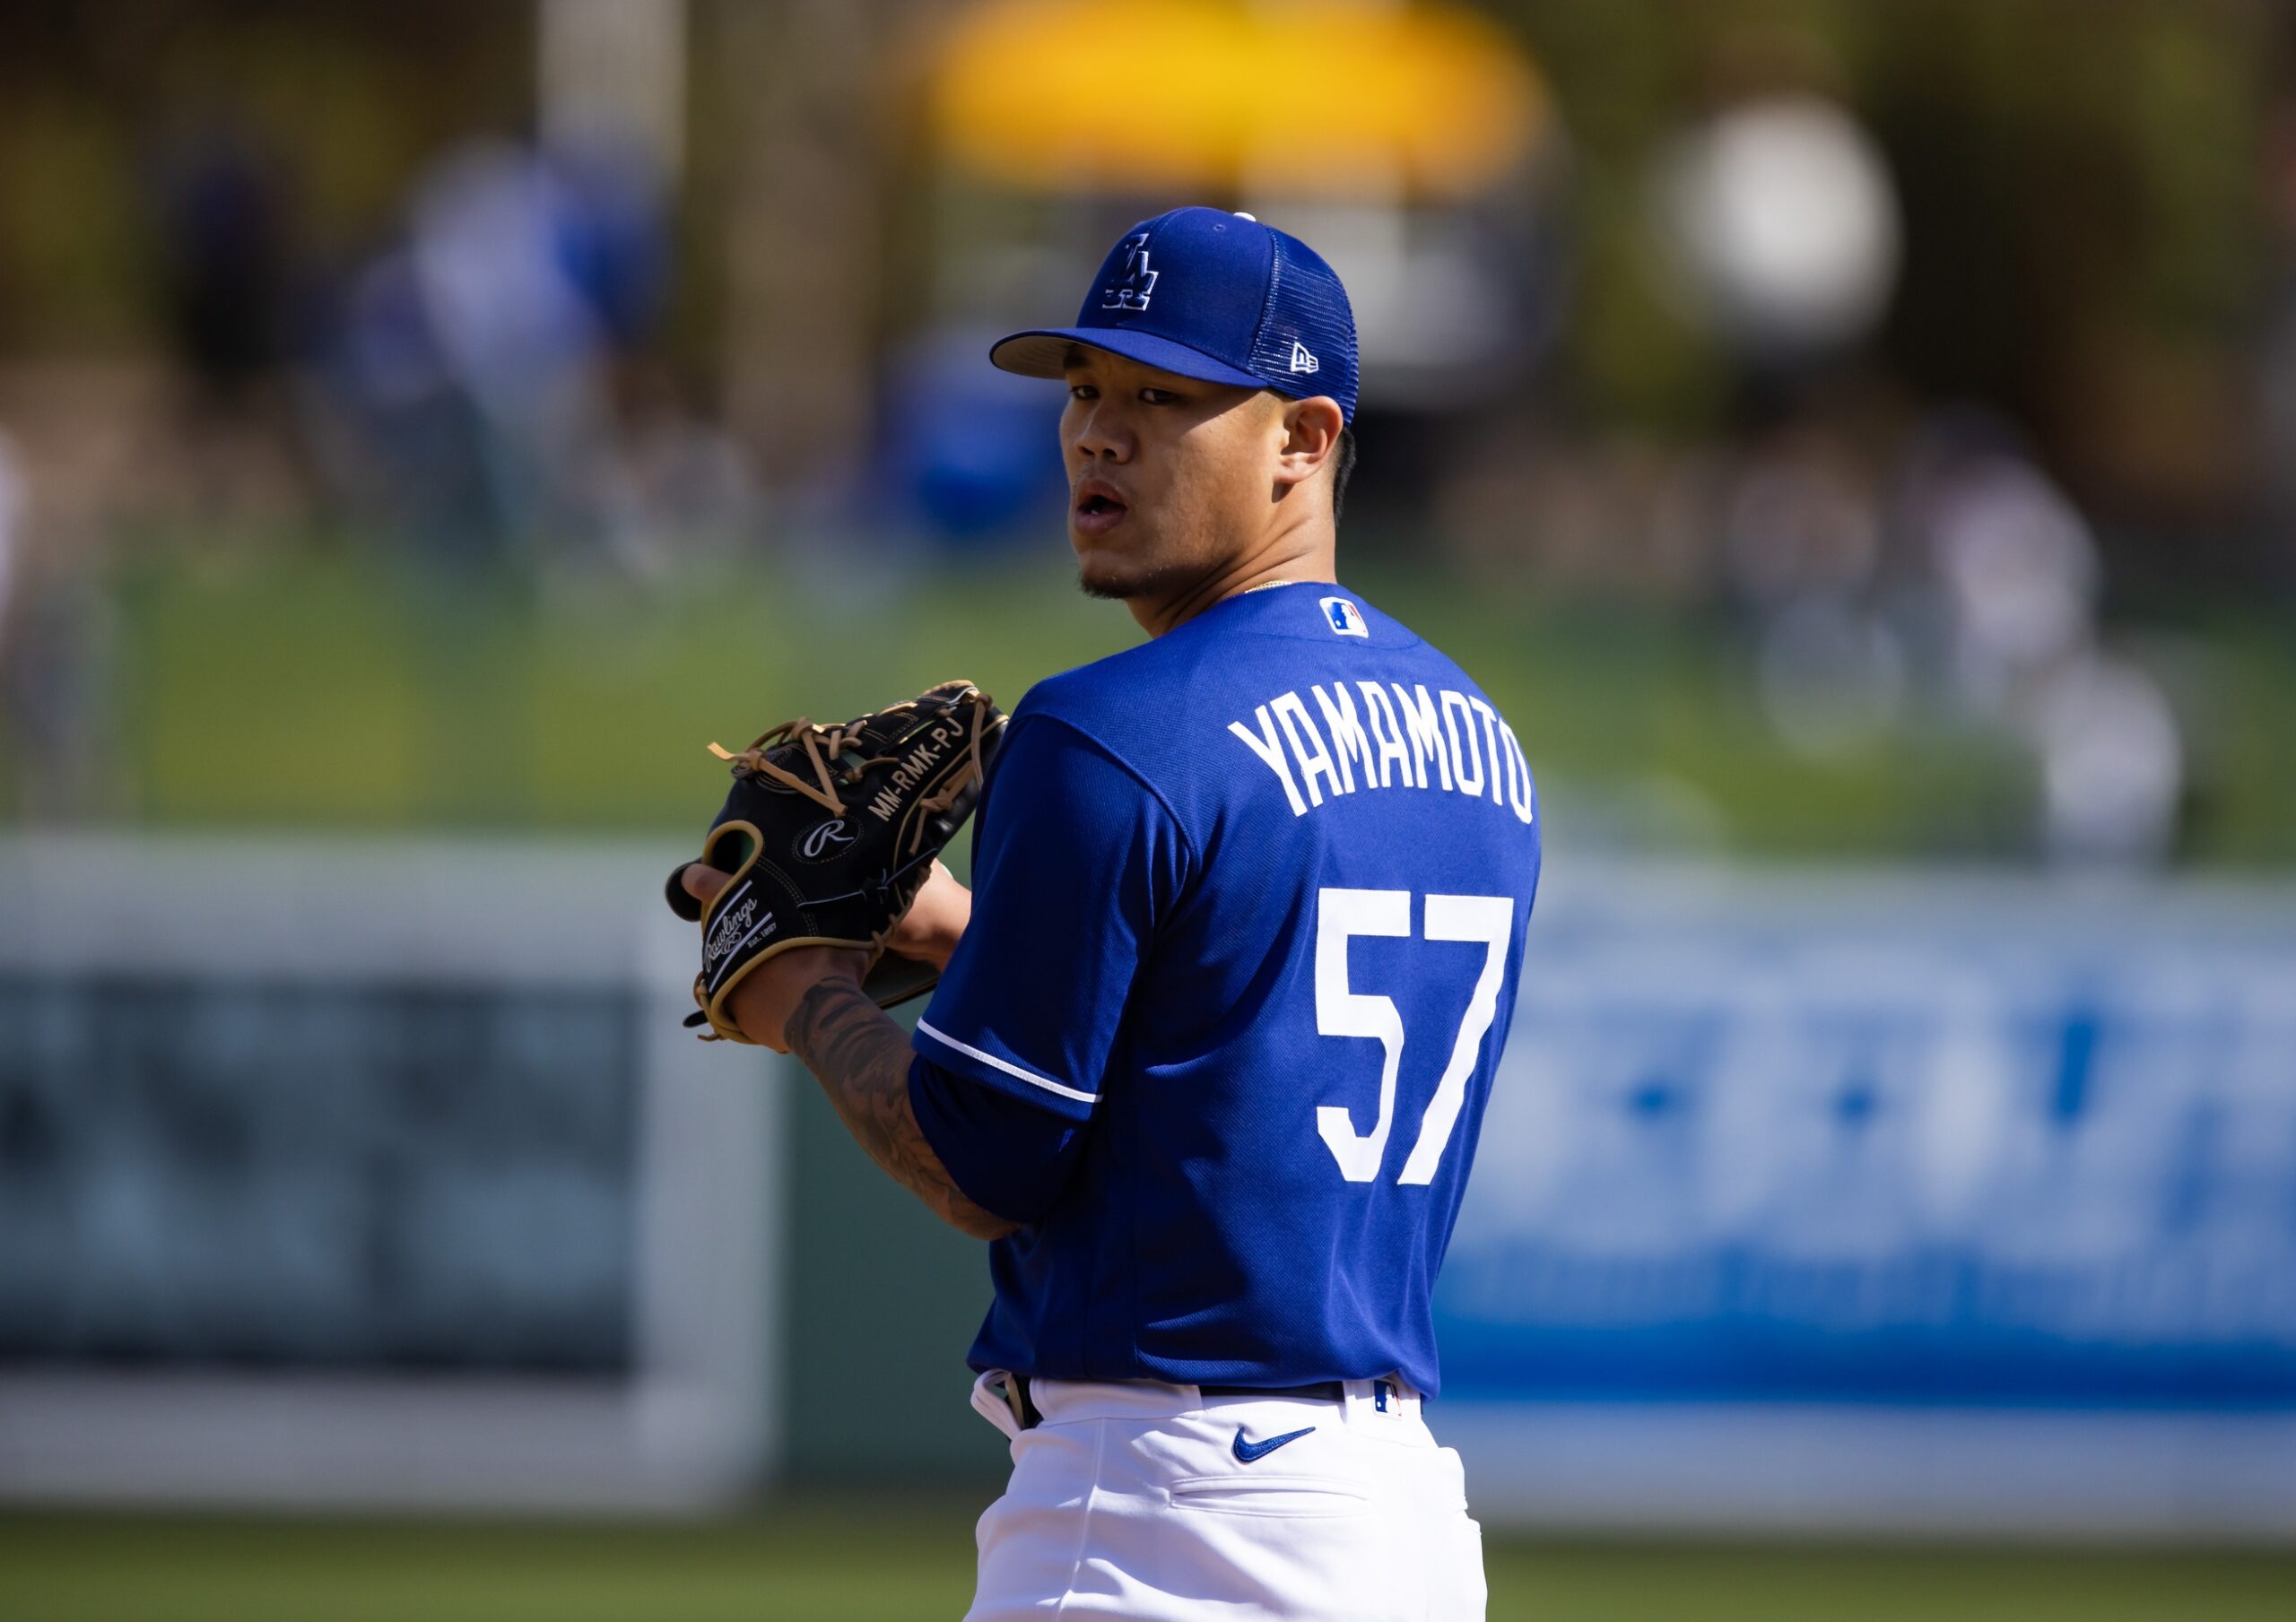 After Being Cut by Dodgers, RHP Jordan Yamamoto Announces Retirement from Baseball